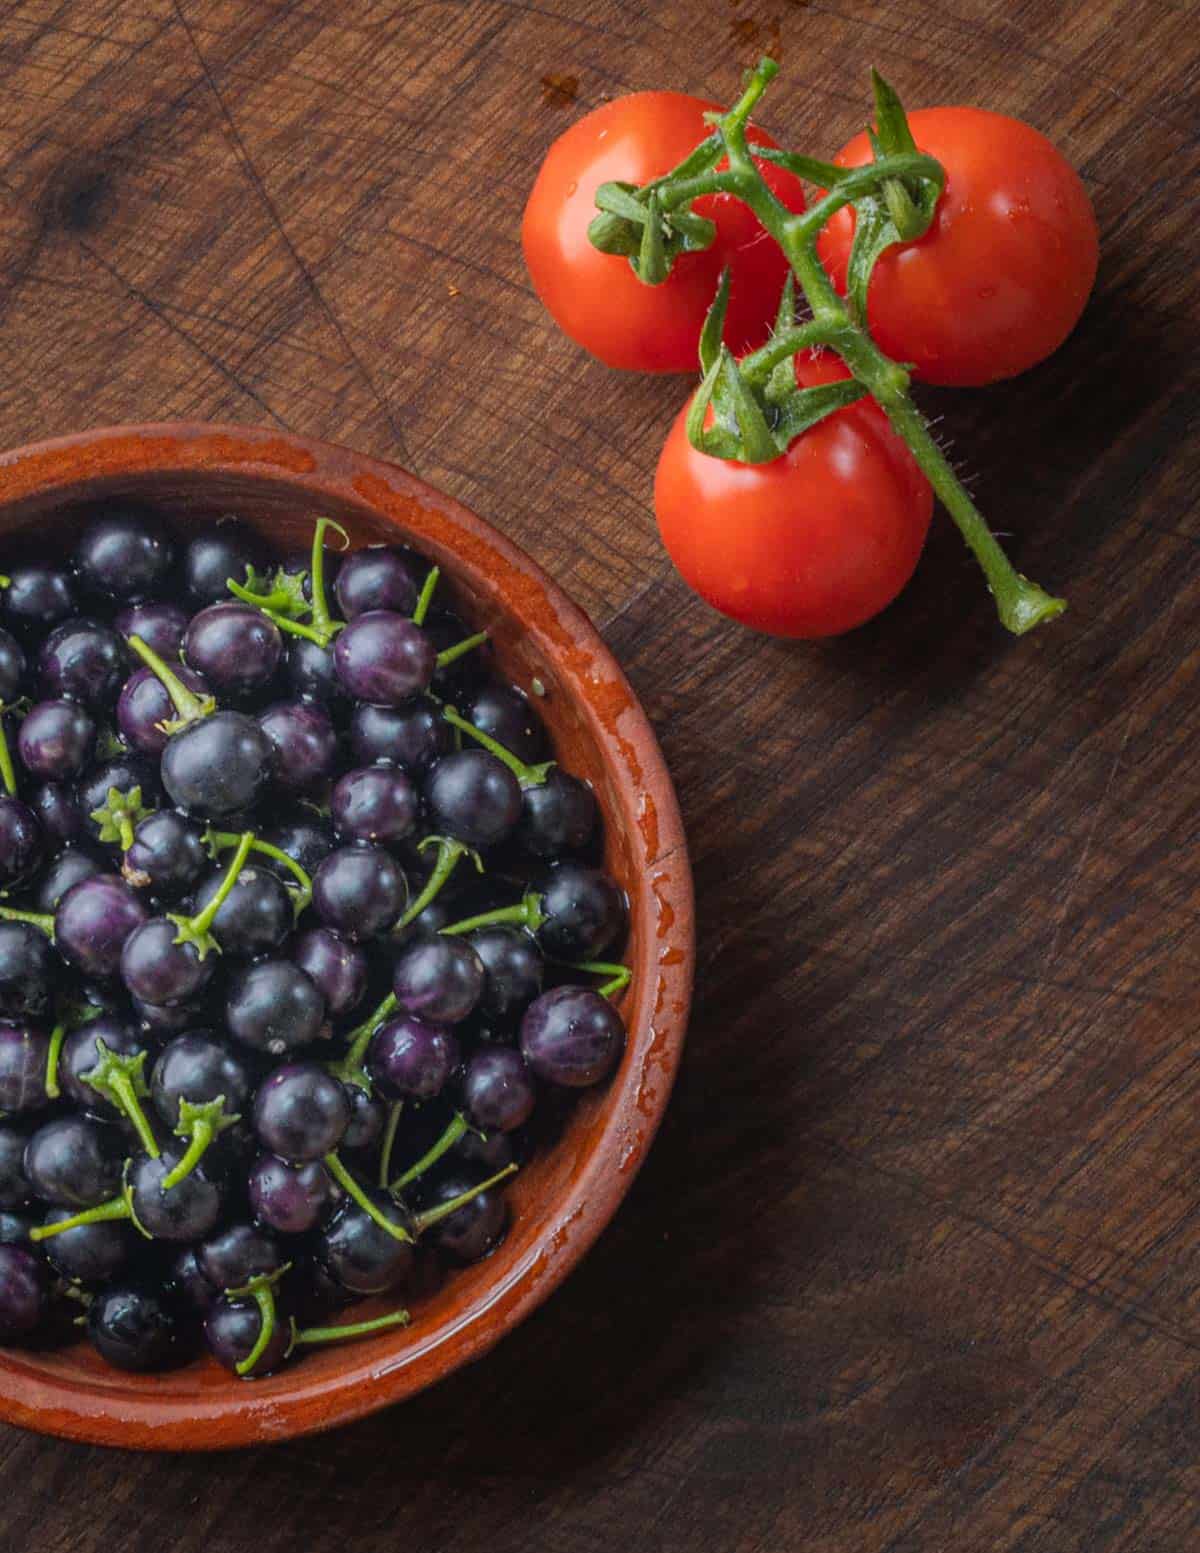 Close up image of edible black nightshade berries in a wooden bowl next to garden cherry tomatoes for size.